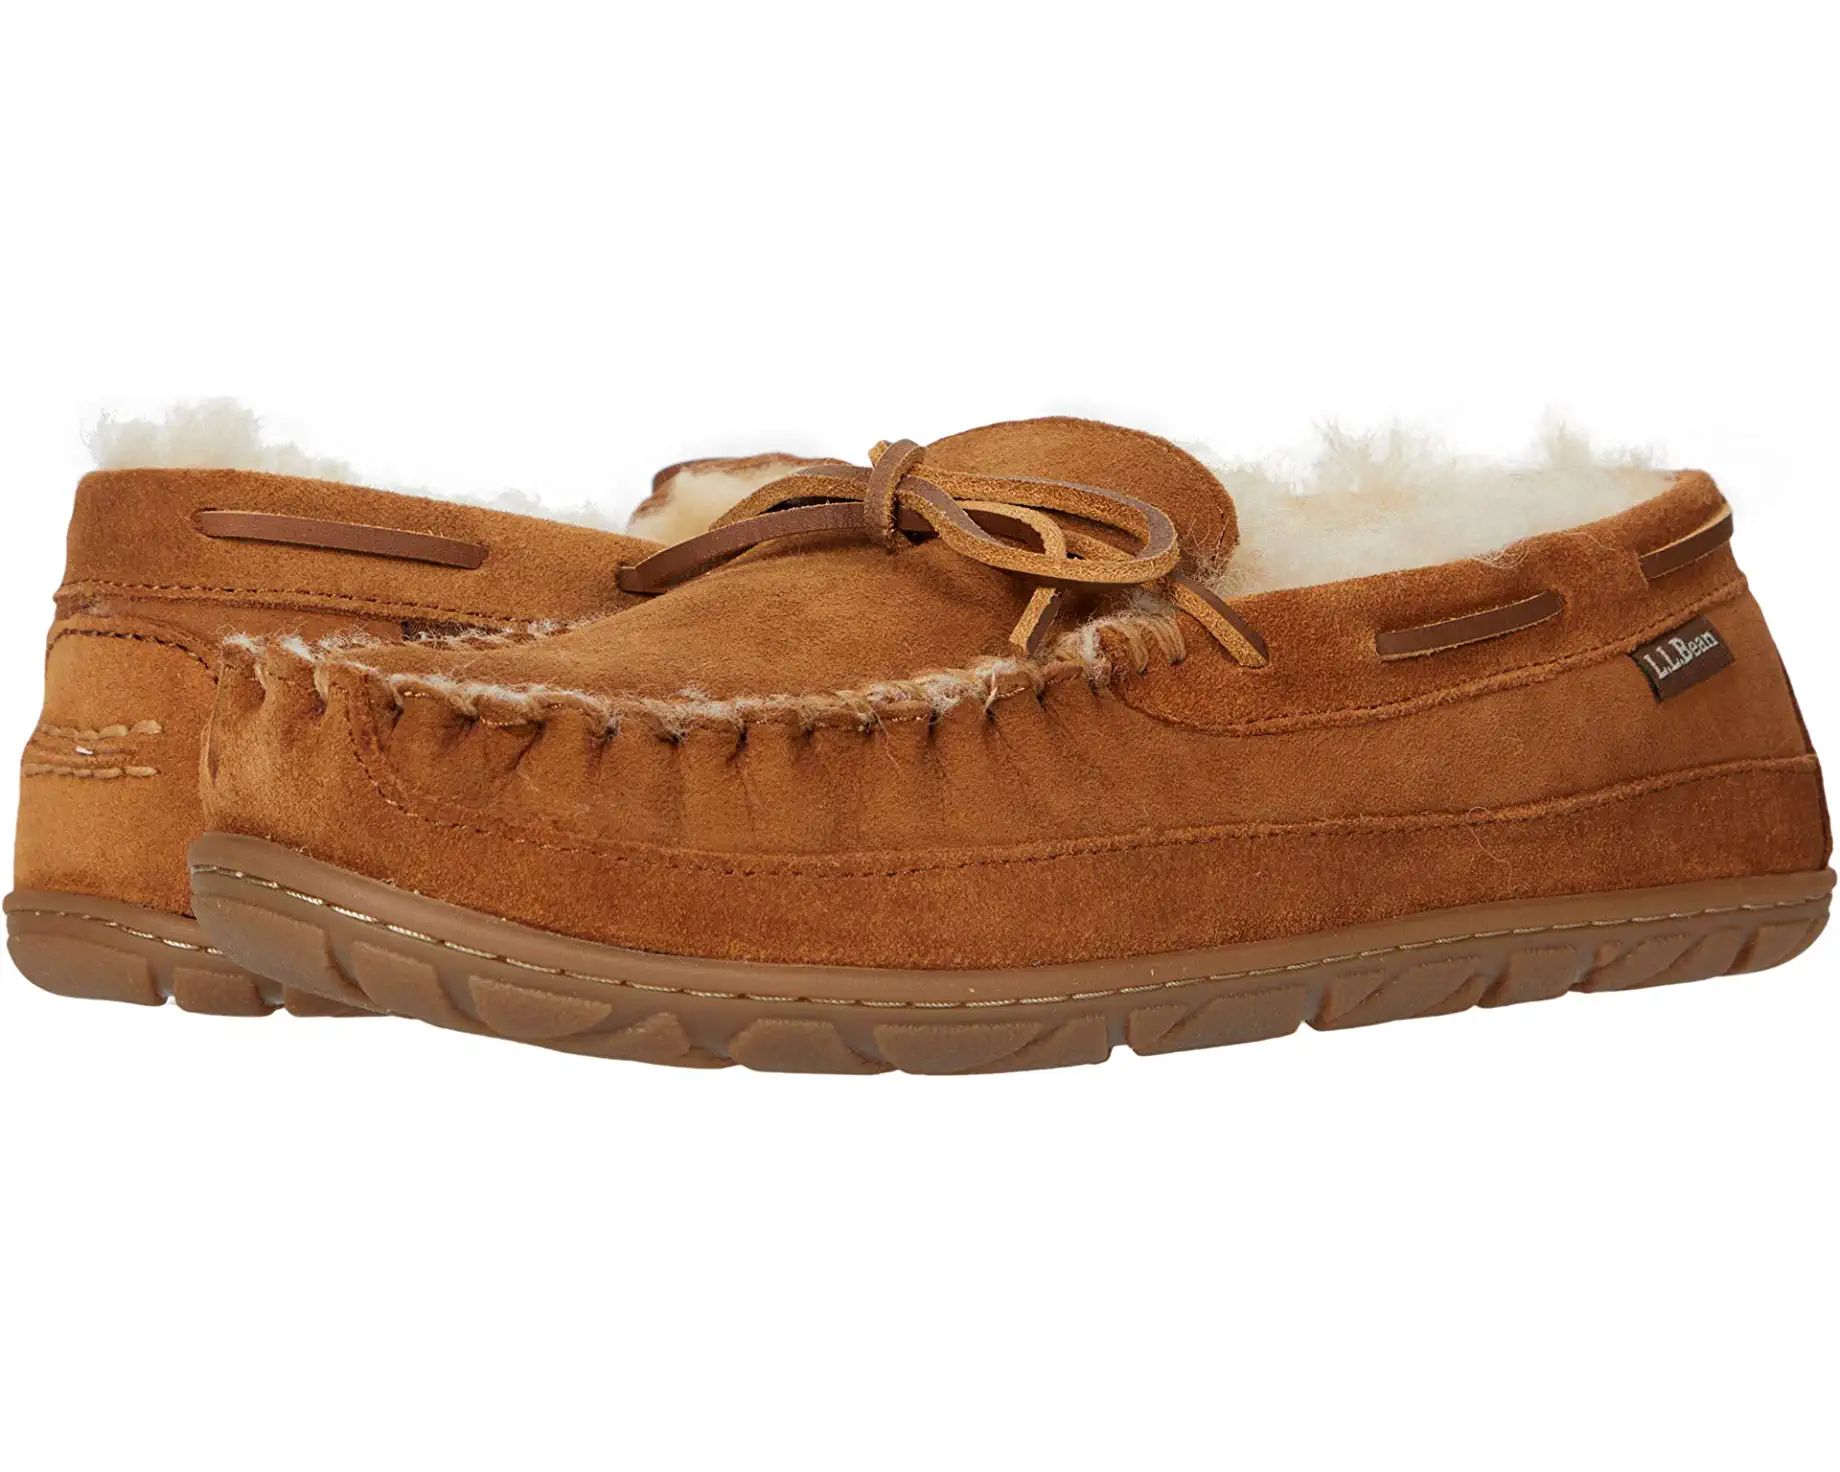 L.L.Bean Wicked Good Moccasins | Zappos